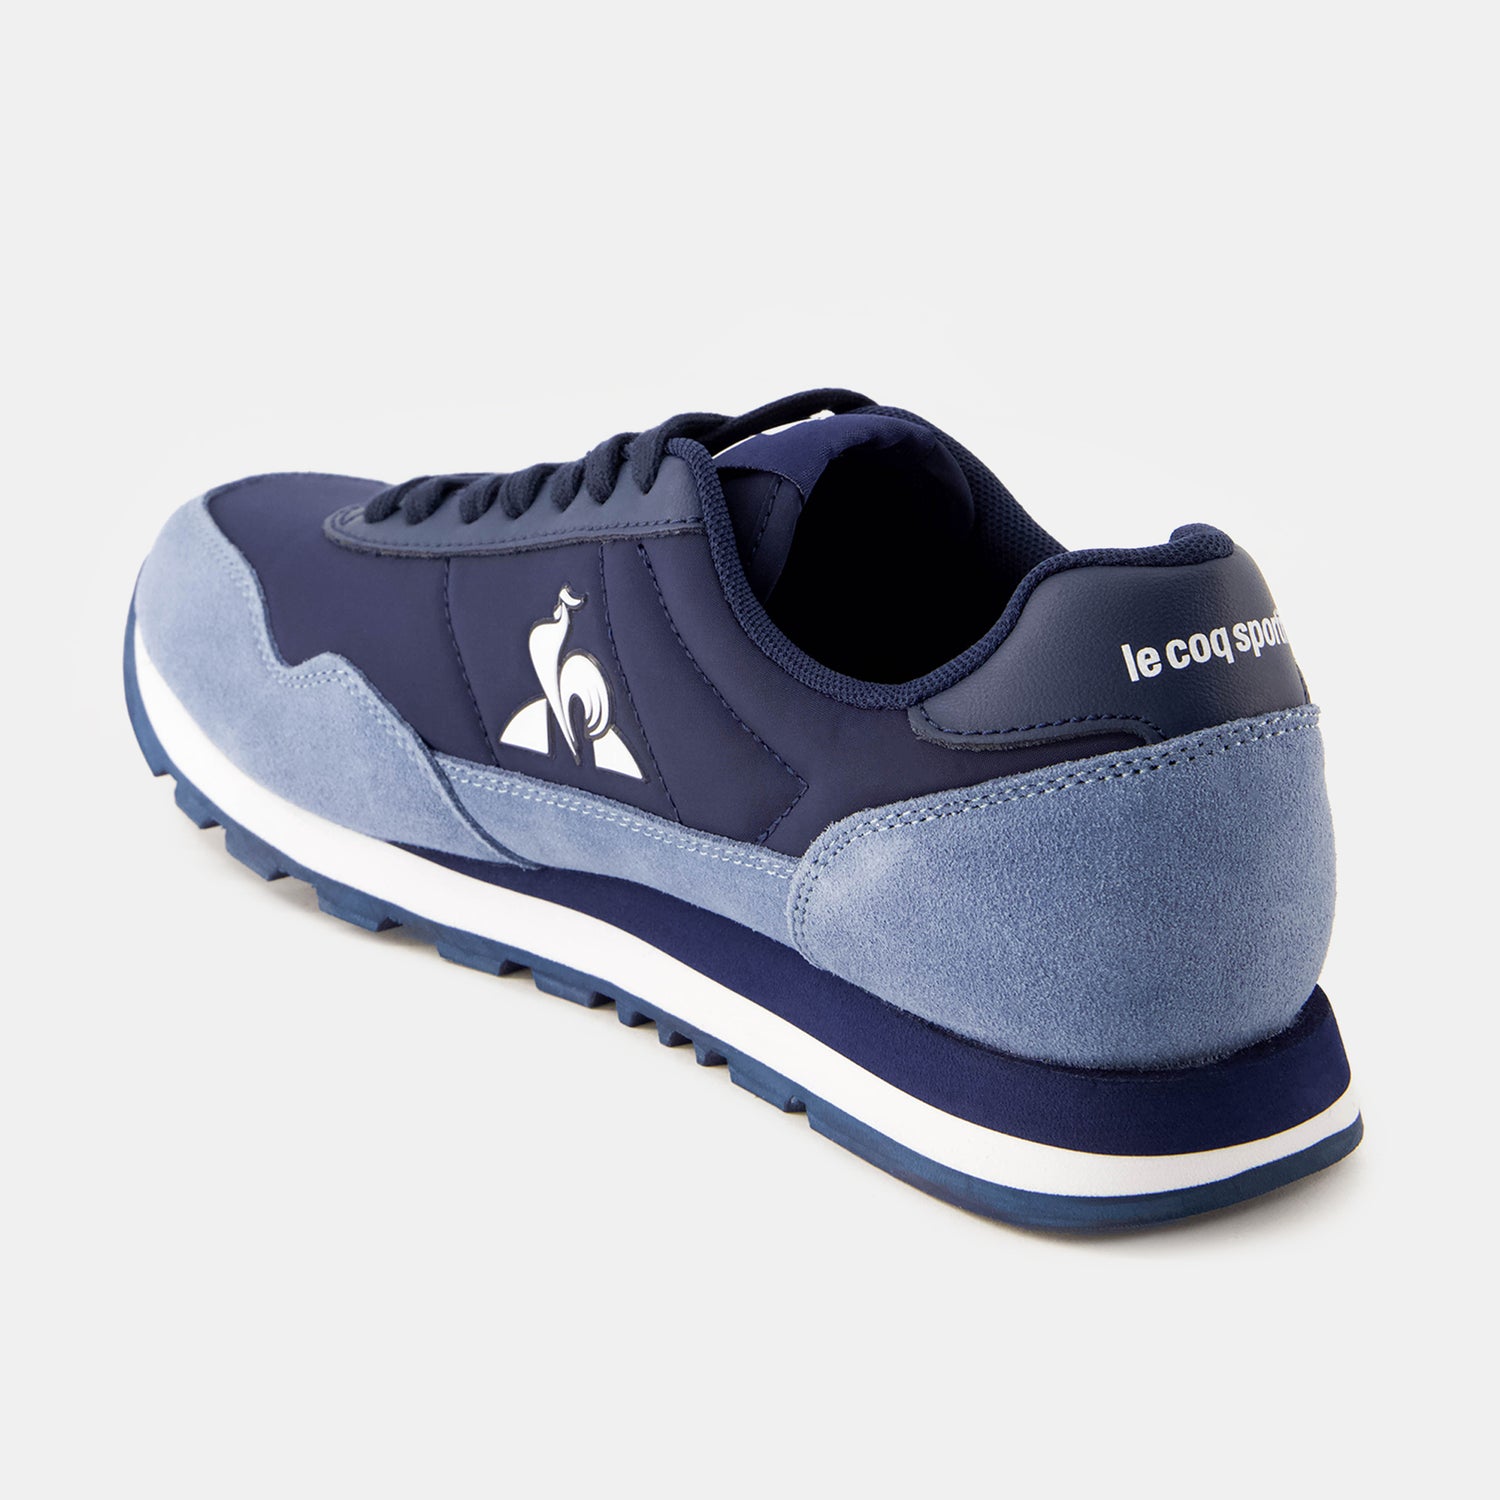 2410503-ASTRA_2 dress blue/ ashley blue | Chaussures ASTRA 2 Unisexe